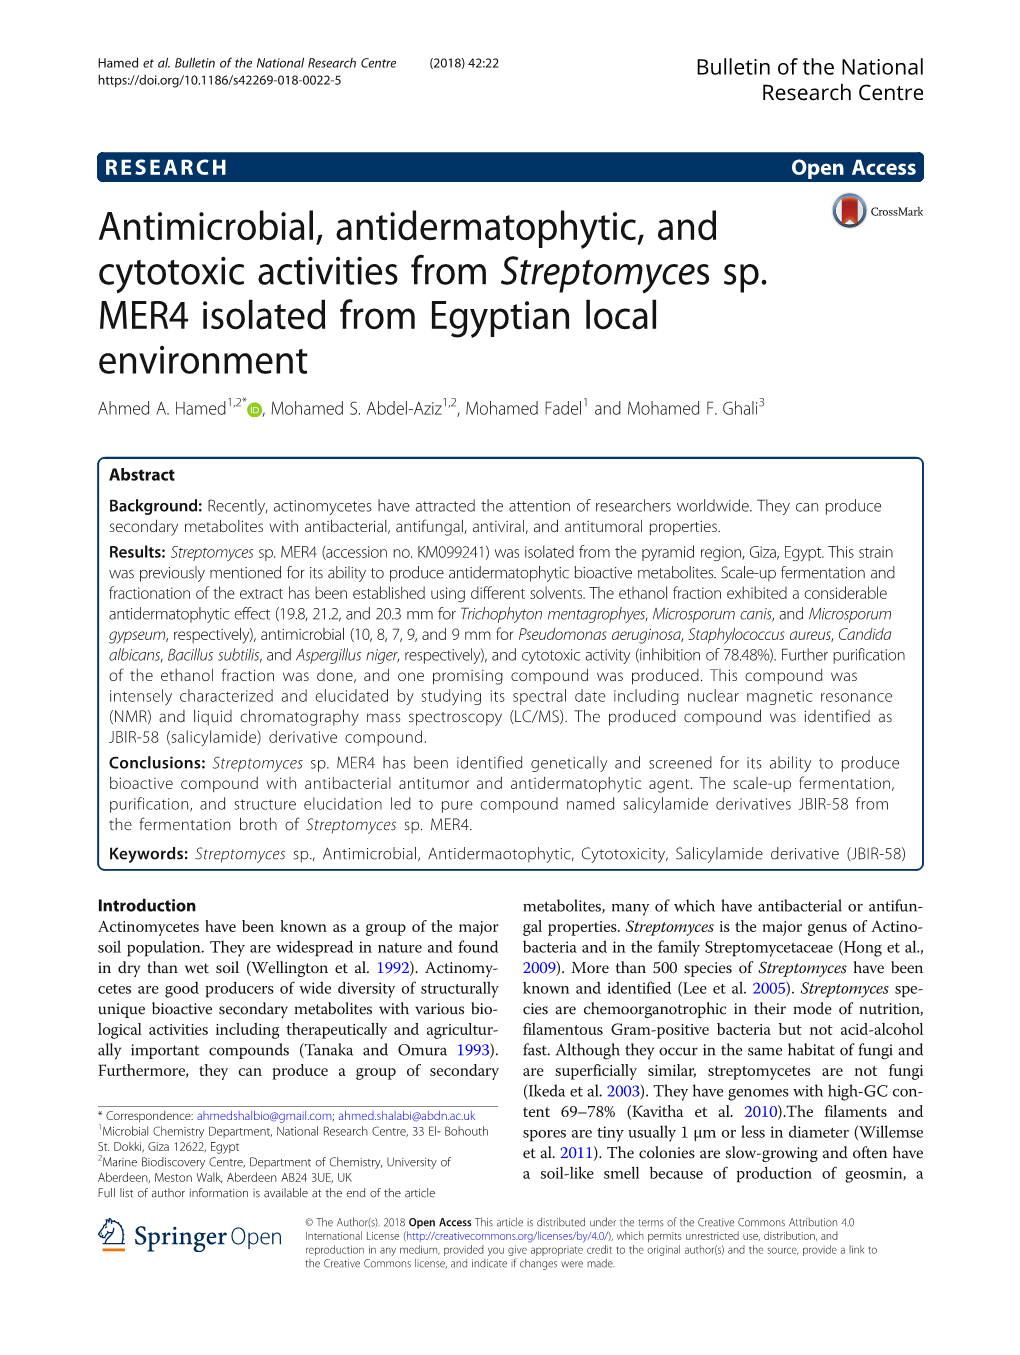 Antimicrobial, Antidermatophytic, and Cytotoxic Activities from Streptomyces Sp